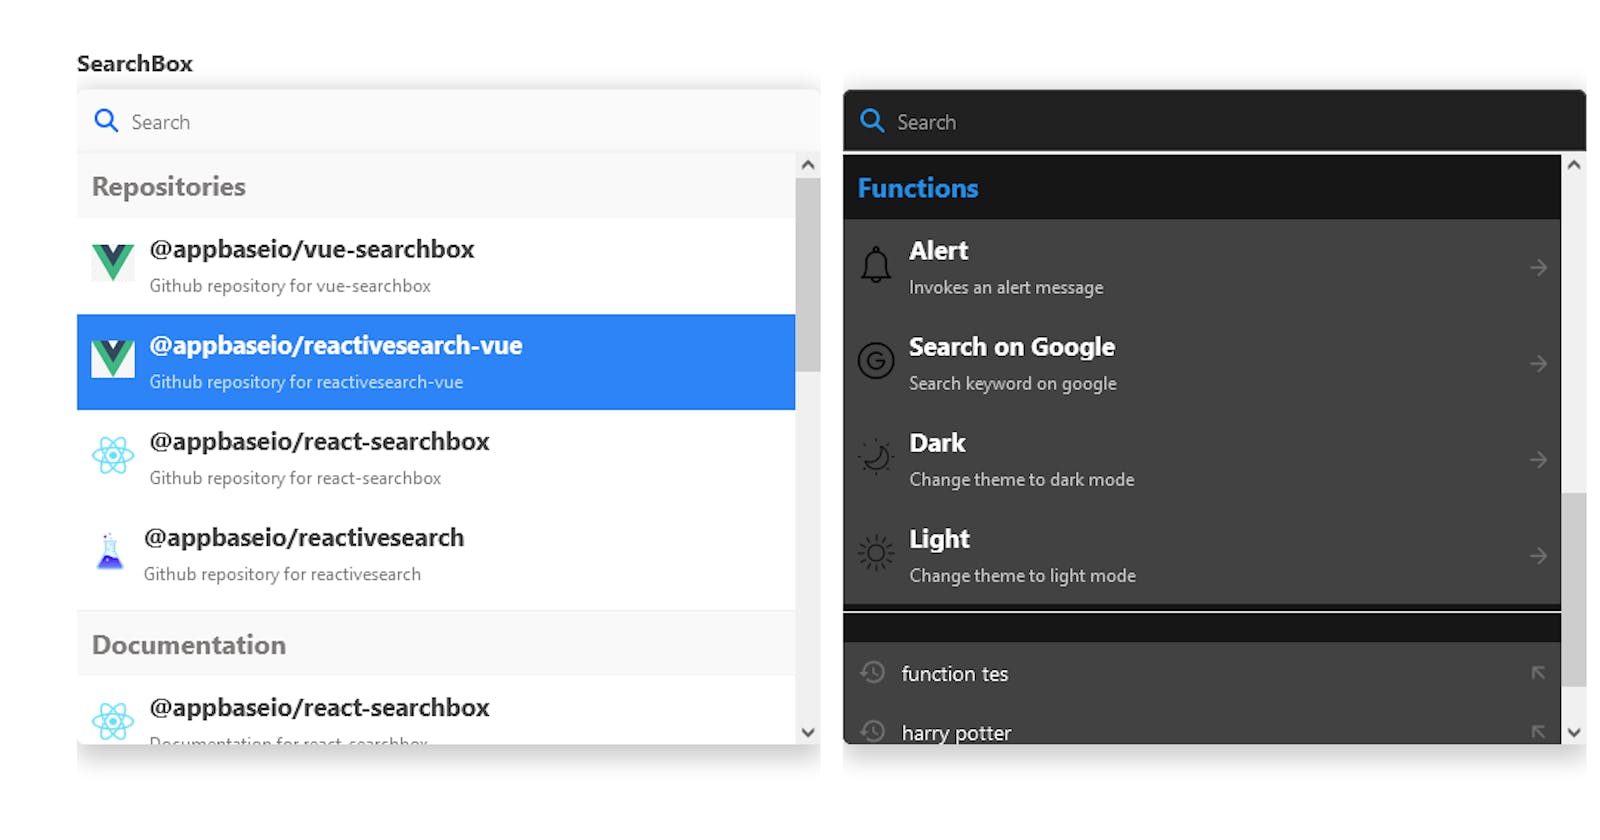 Different ways to use the SearchBox component - Featured Suggestions